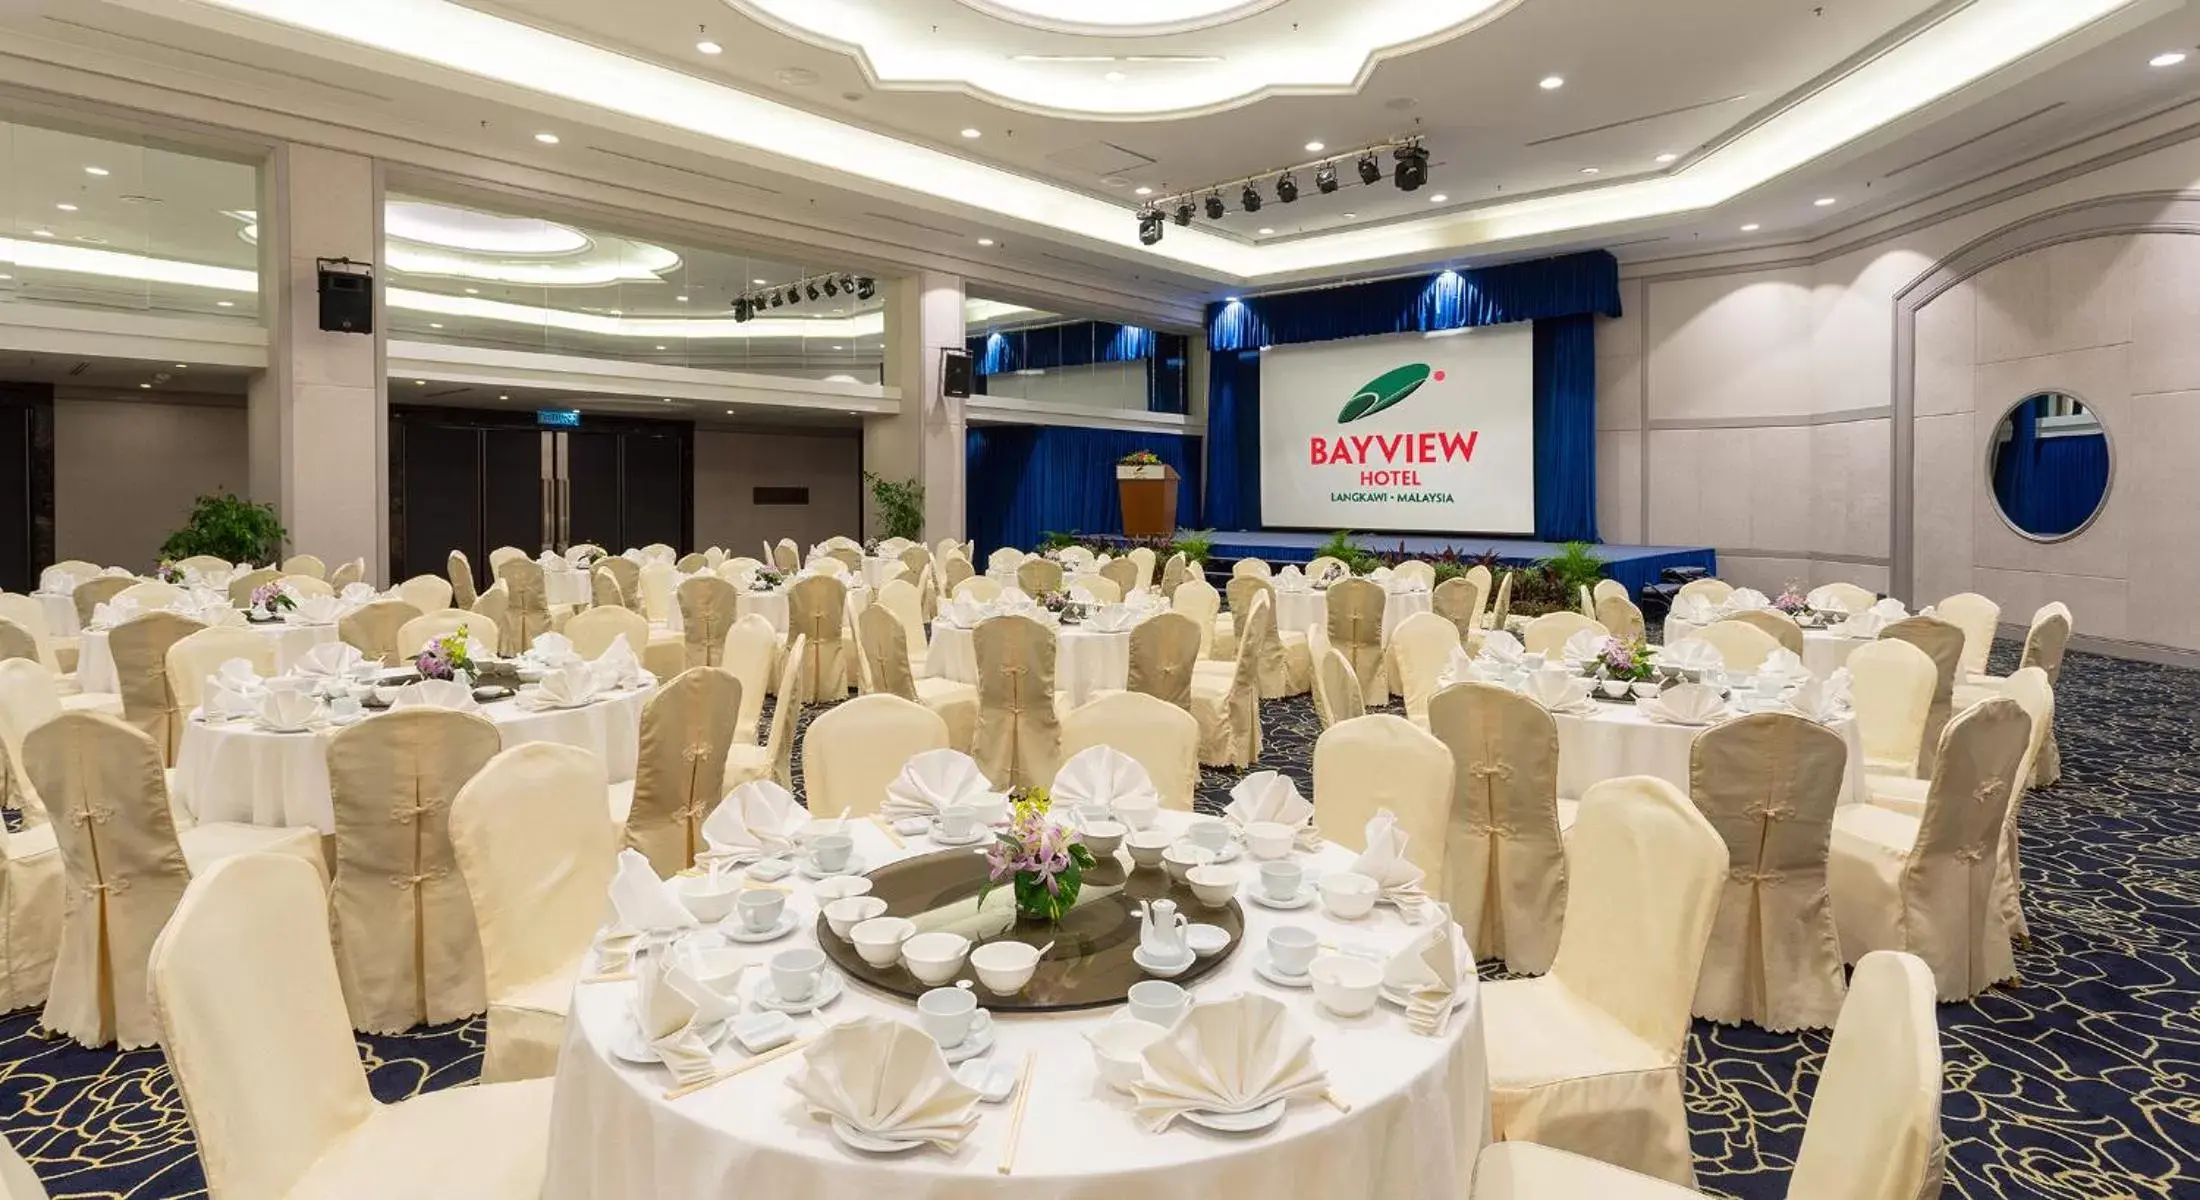 Banquet/Function facilities, Banquet Facilities in Bayview Hotel Langkawi